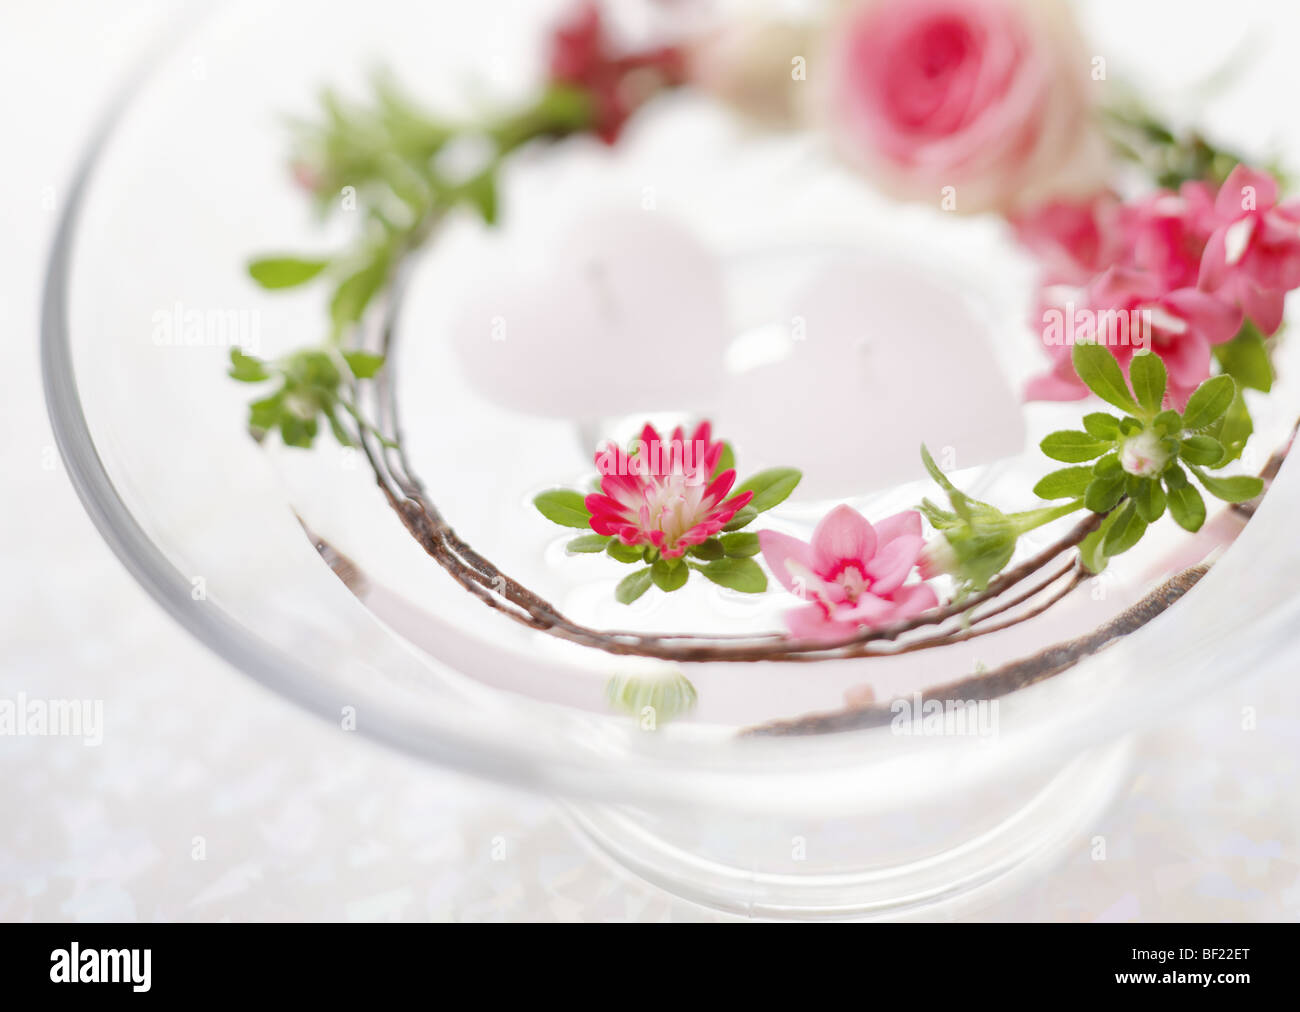 Floating candle and wreath Stock Photo